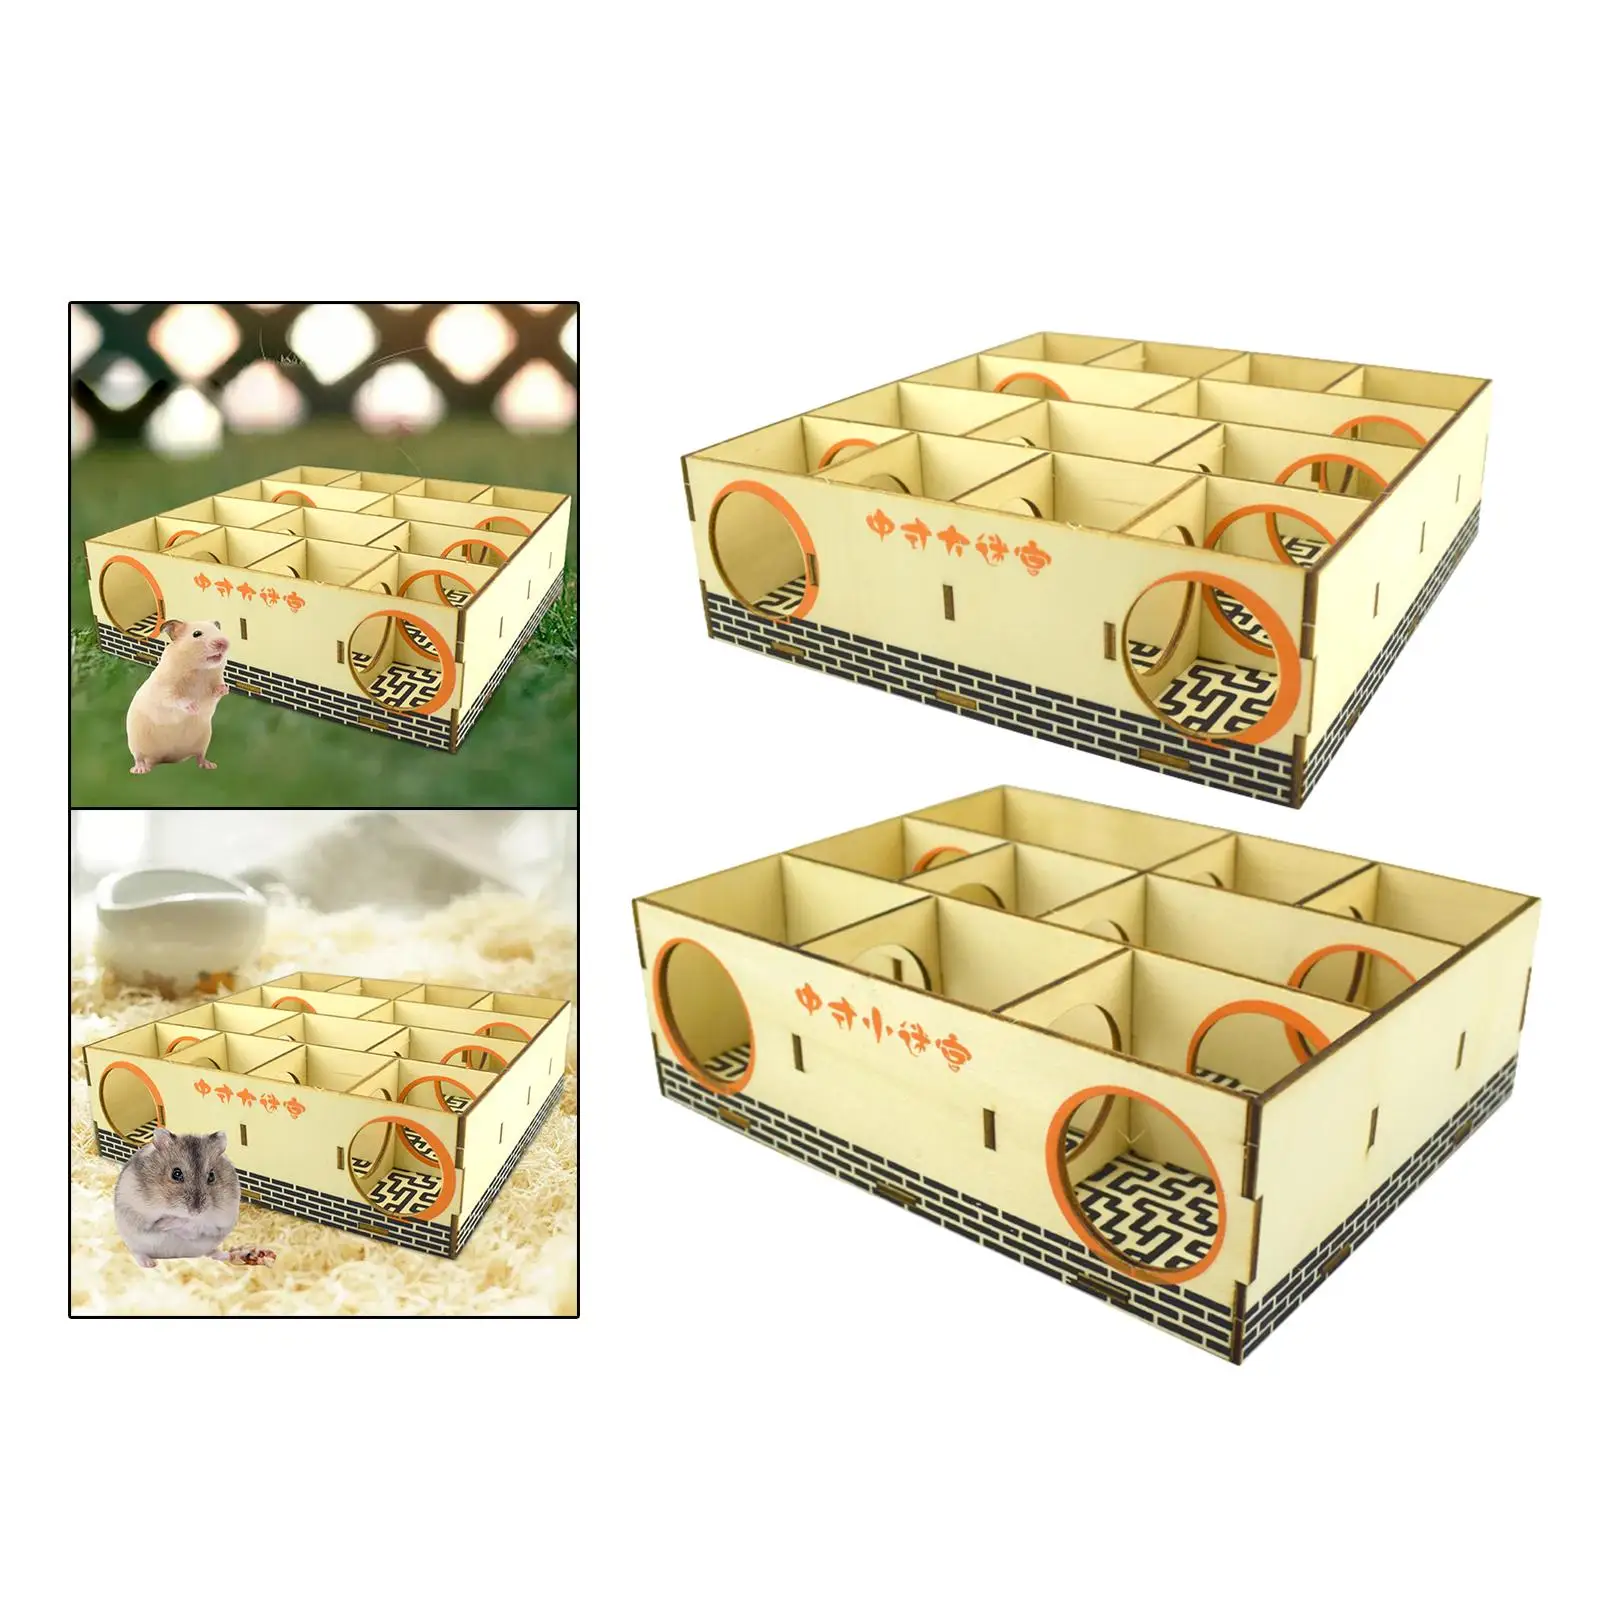 Hamster Maze House Wooden Activity Sport Labyrinth Puzzle Toy Hideout Tunnel